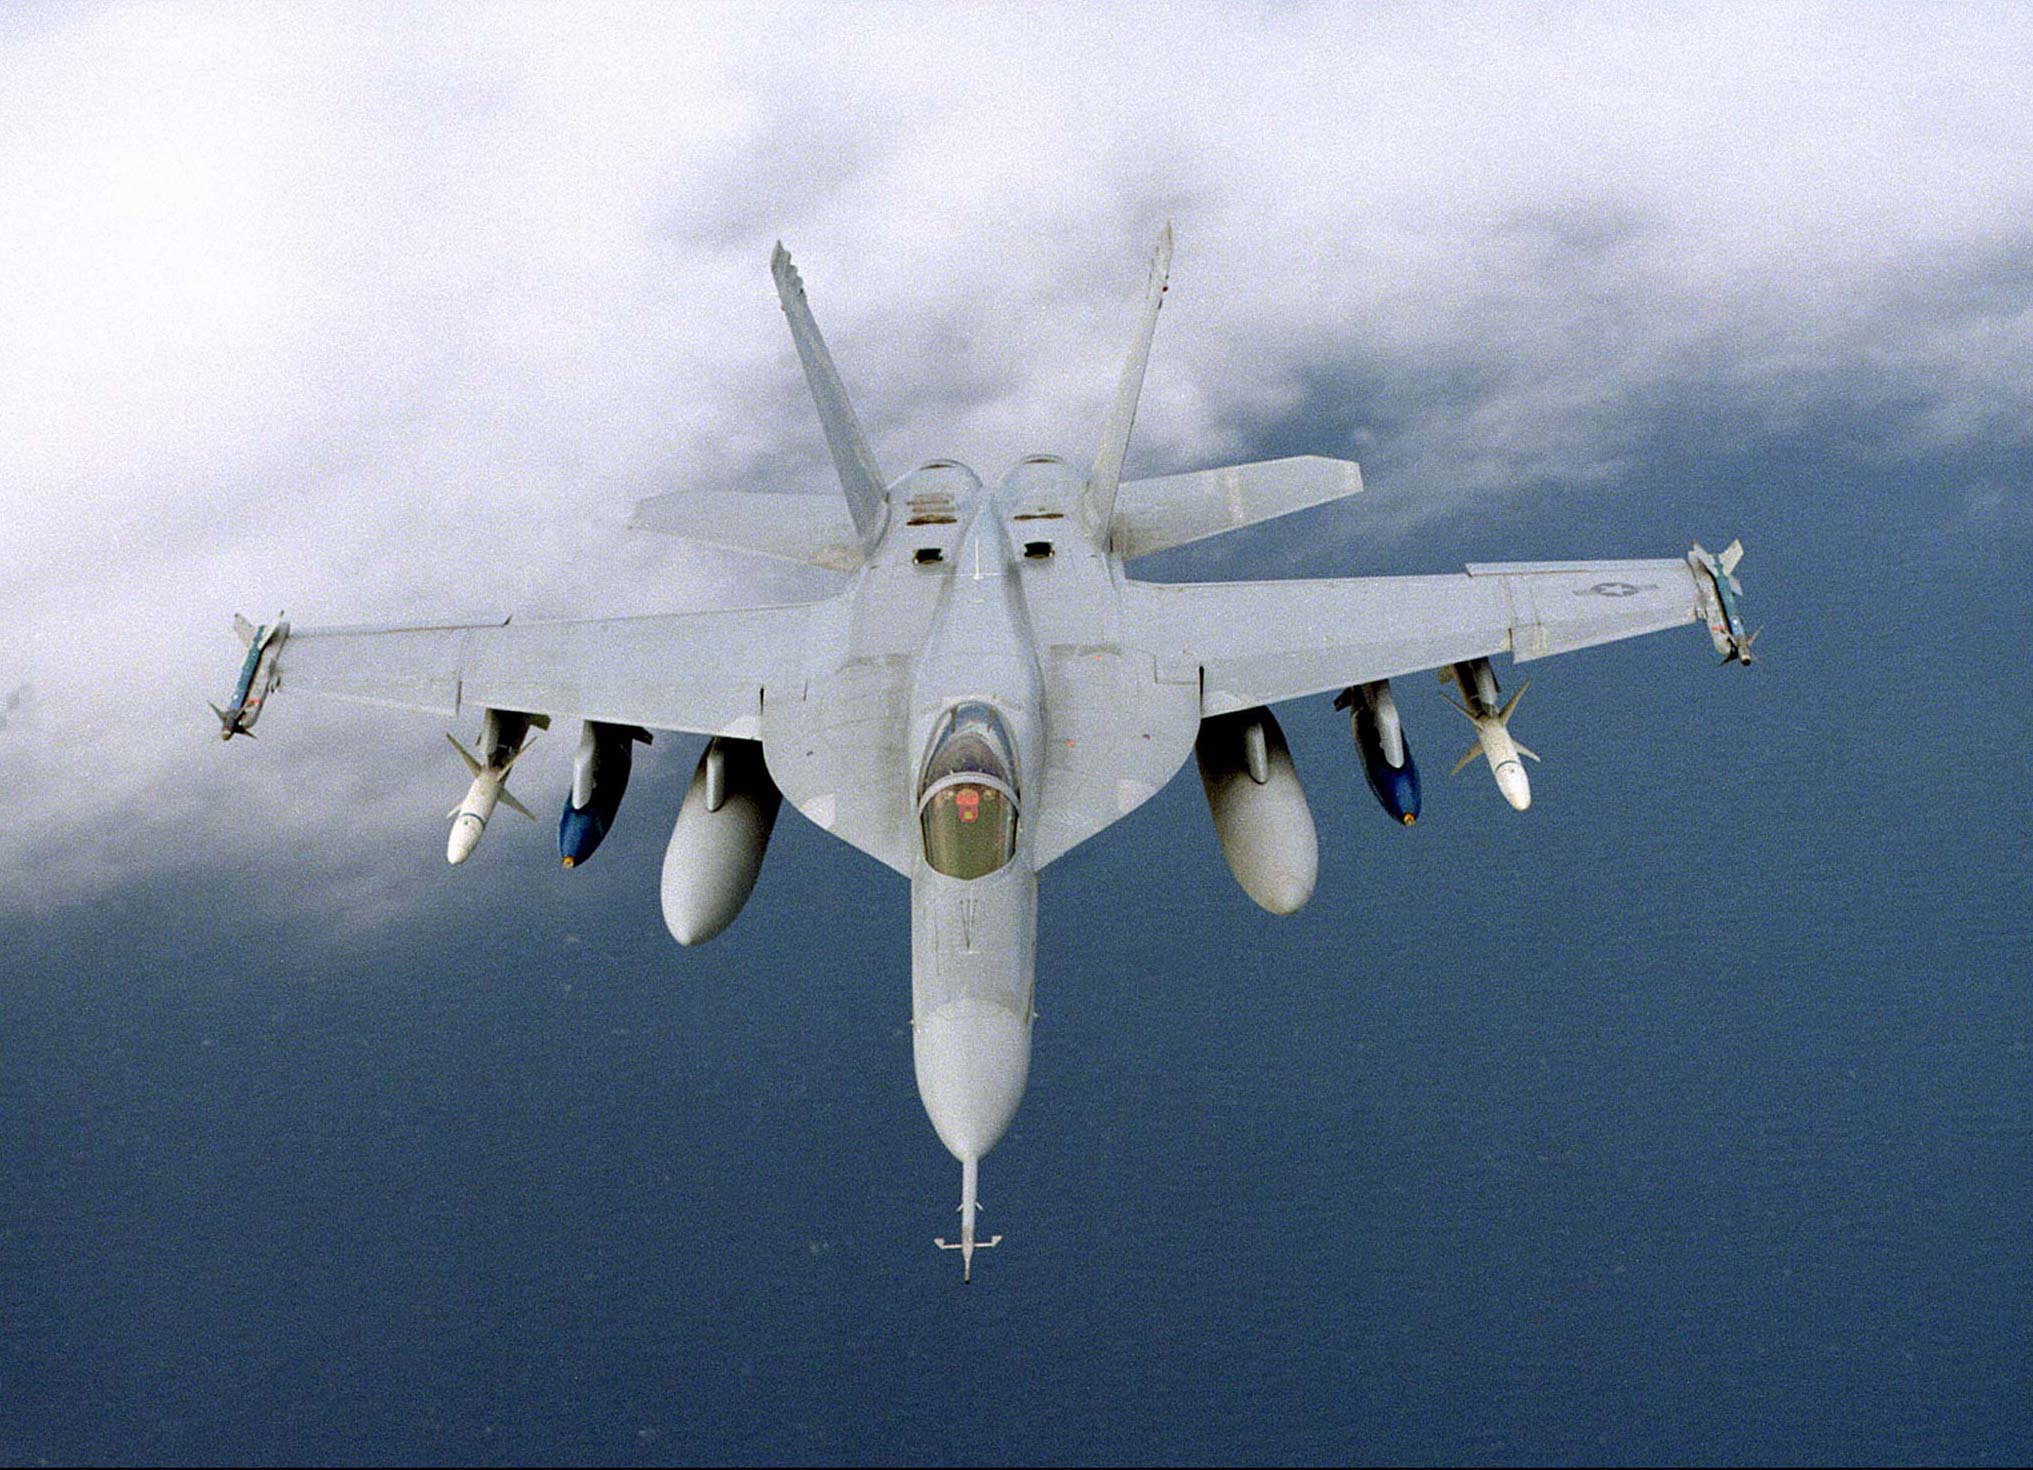 The U.S. Navy's newest strike fighter, the F/A-18E 